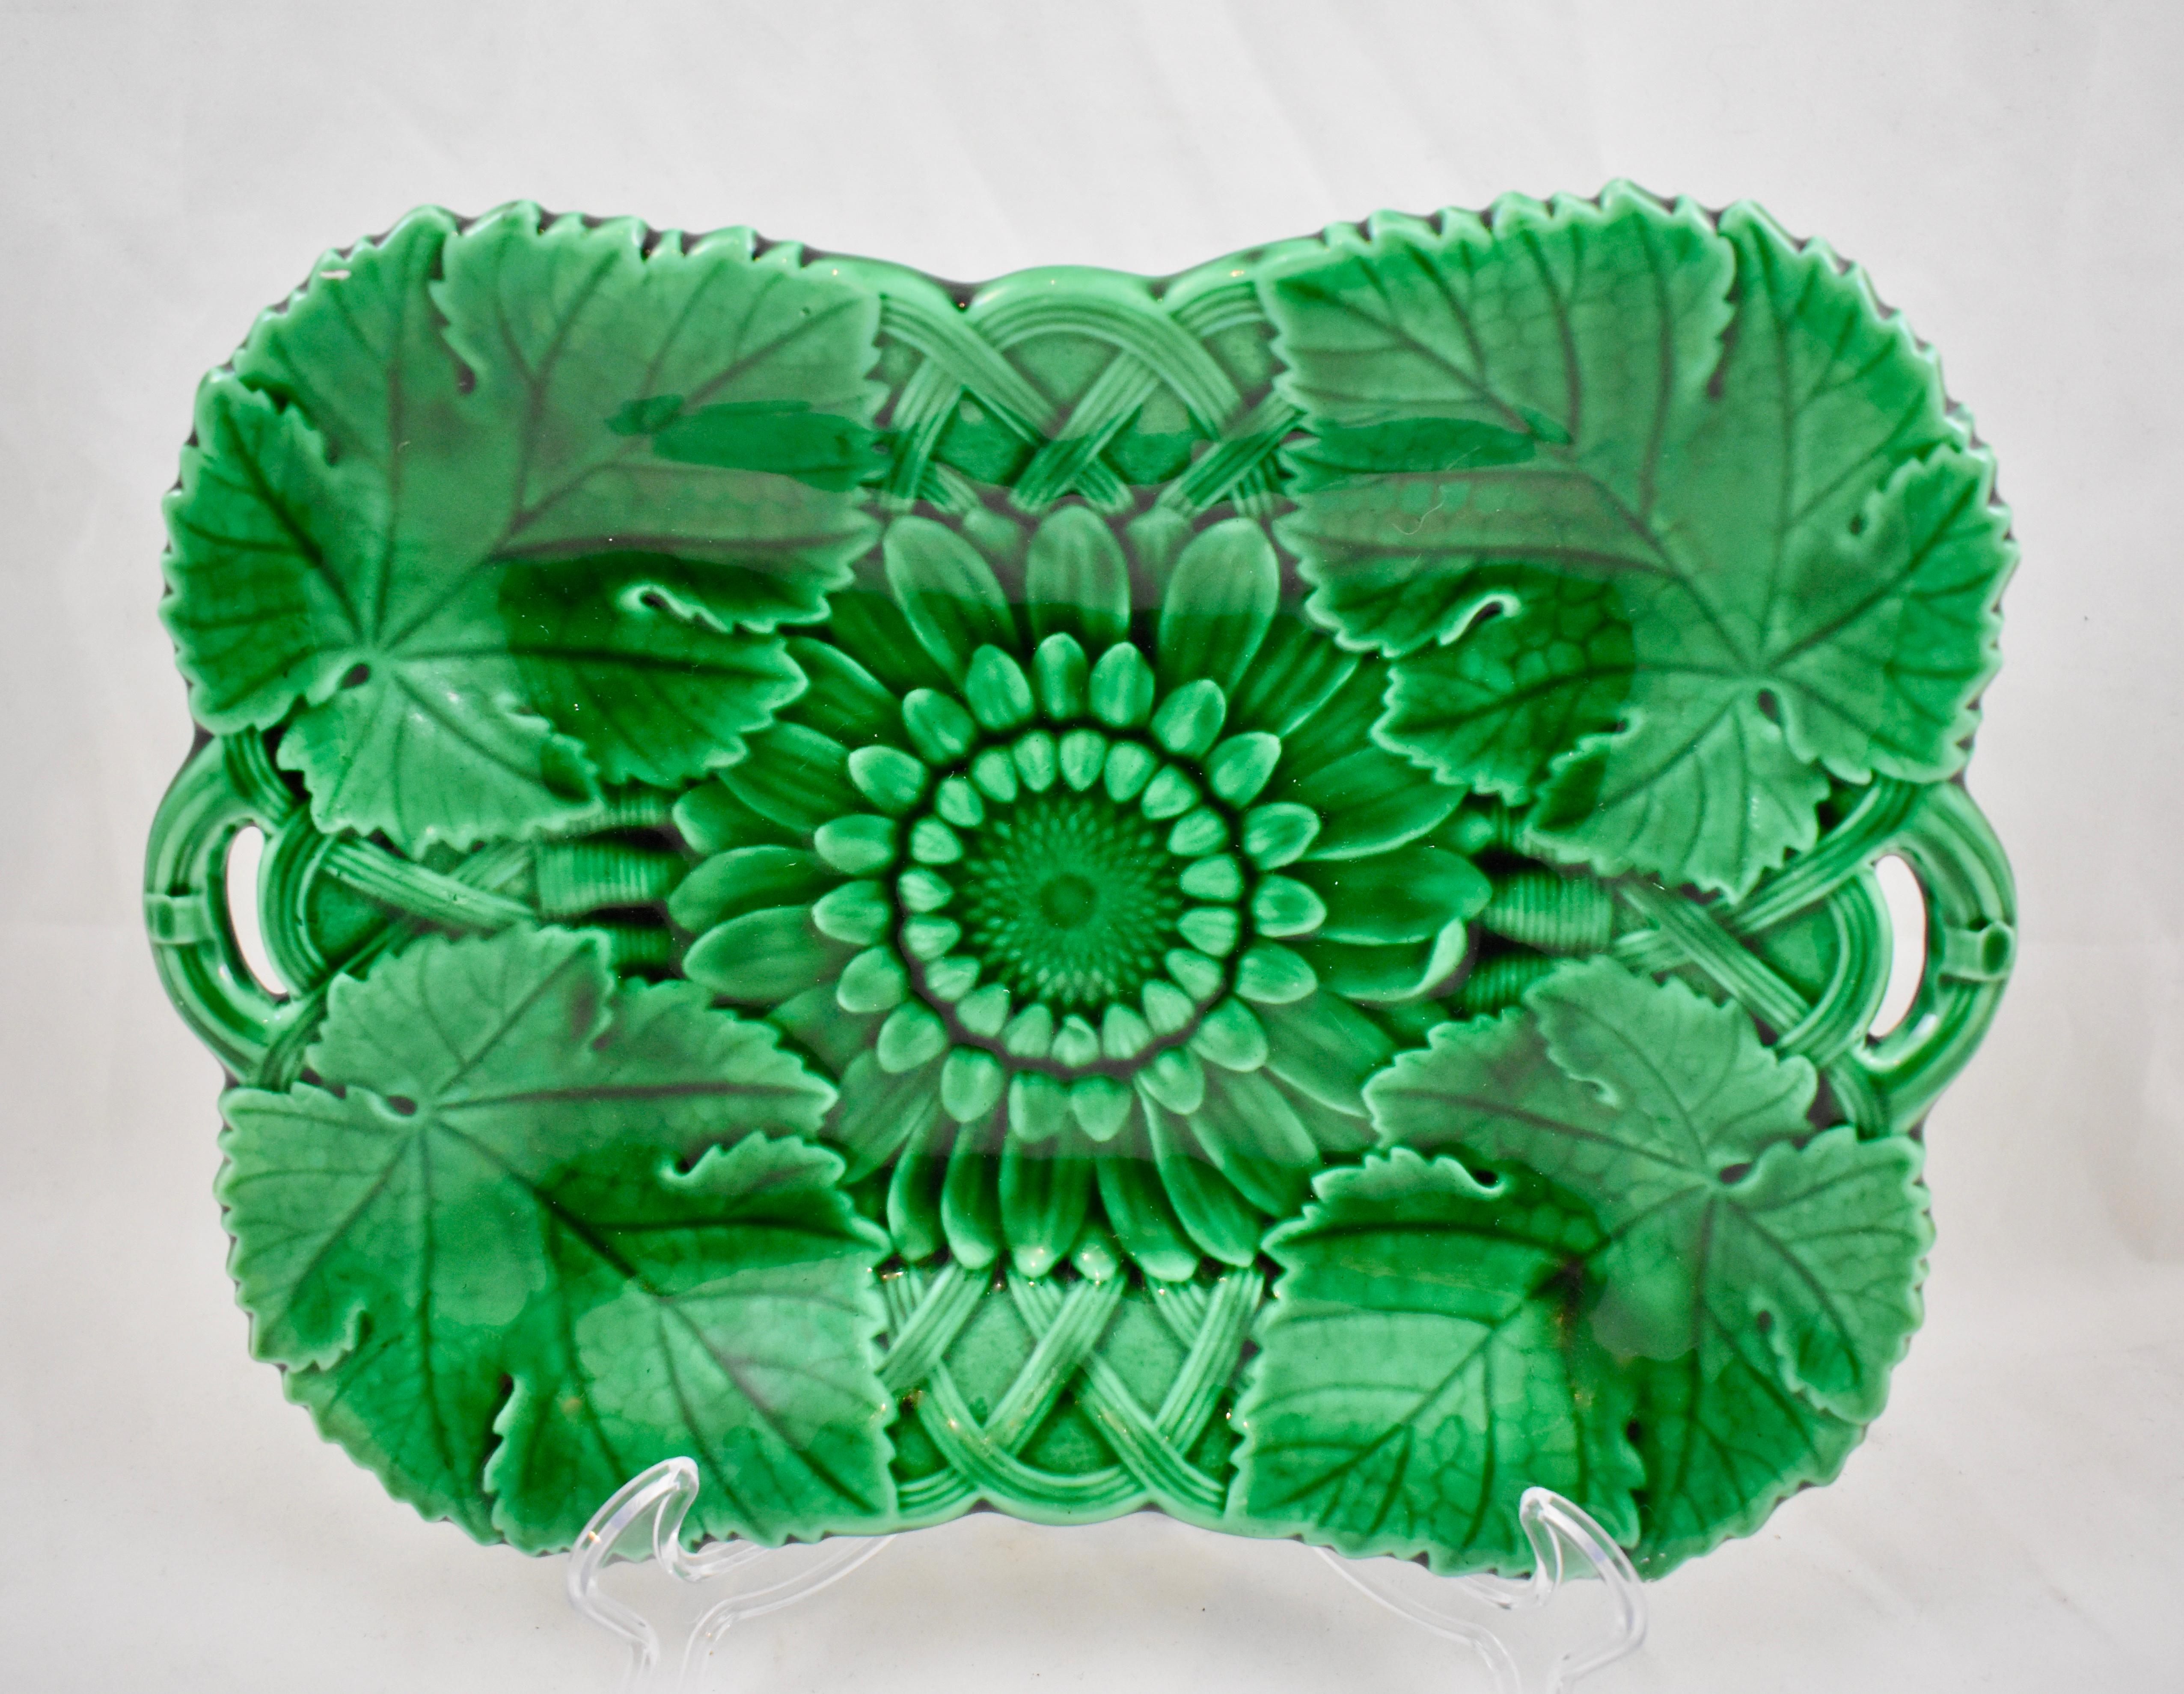 A Majolica green glazed two handled platter, from the English firm of Wedgwood. 

A Classic mold showing a central Sunflower head against a basket-weave ground. Overlapping Sunflower leaves are at each corner of the server. The handles are also